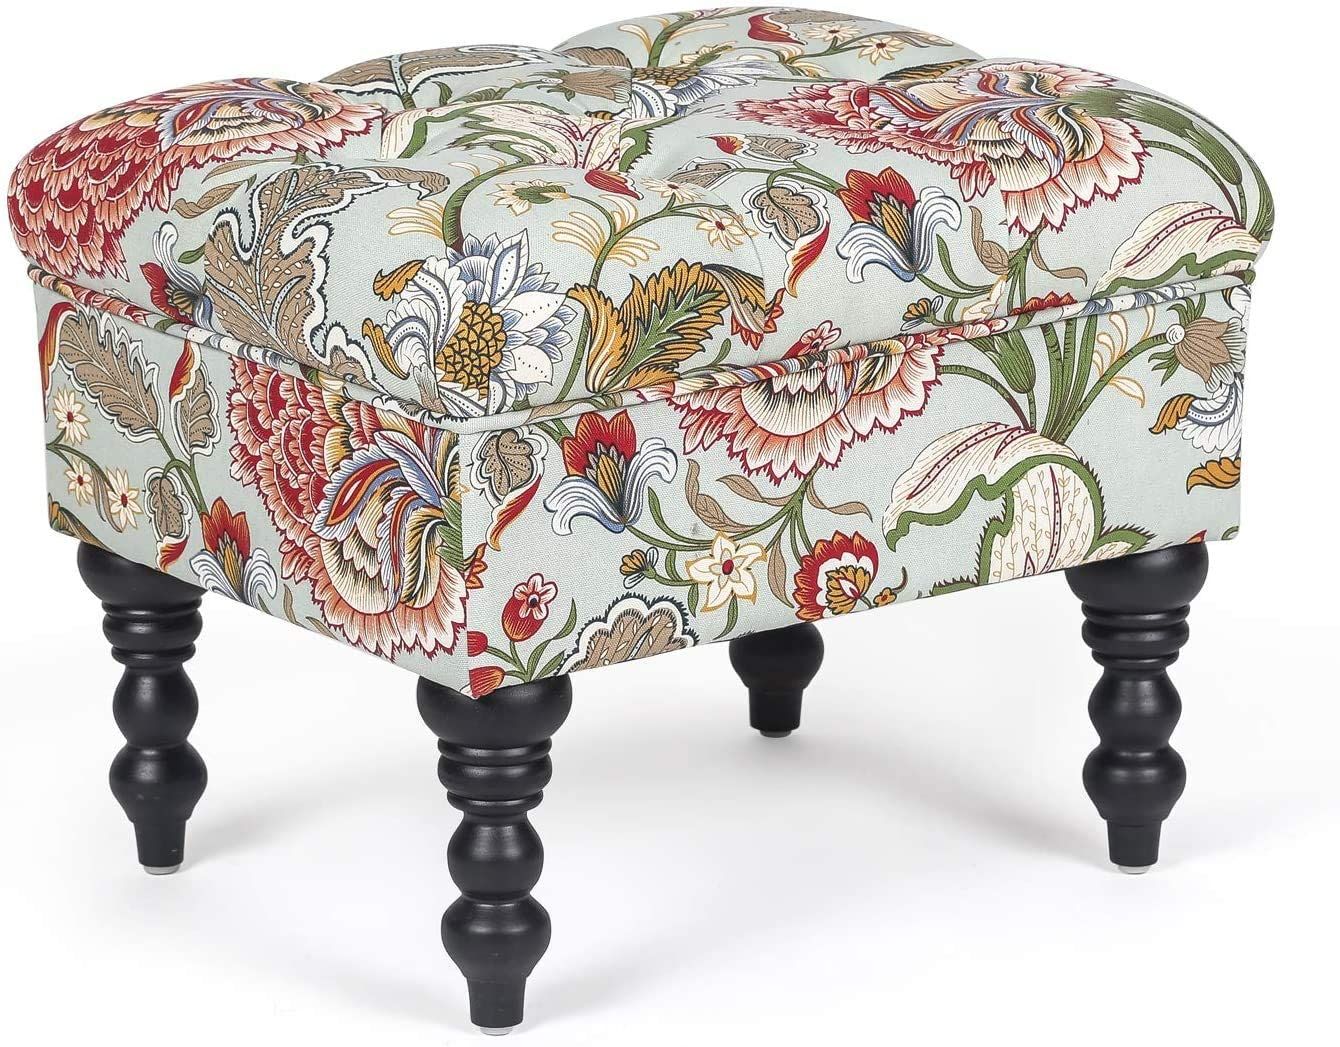 Homebeez Ottoman Stool Tufted Foot Rest Fabric Floral Vanity Stool With Inside Black Fabric Ottomans With Fringe Trim (View 15 of 20)